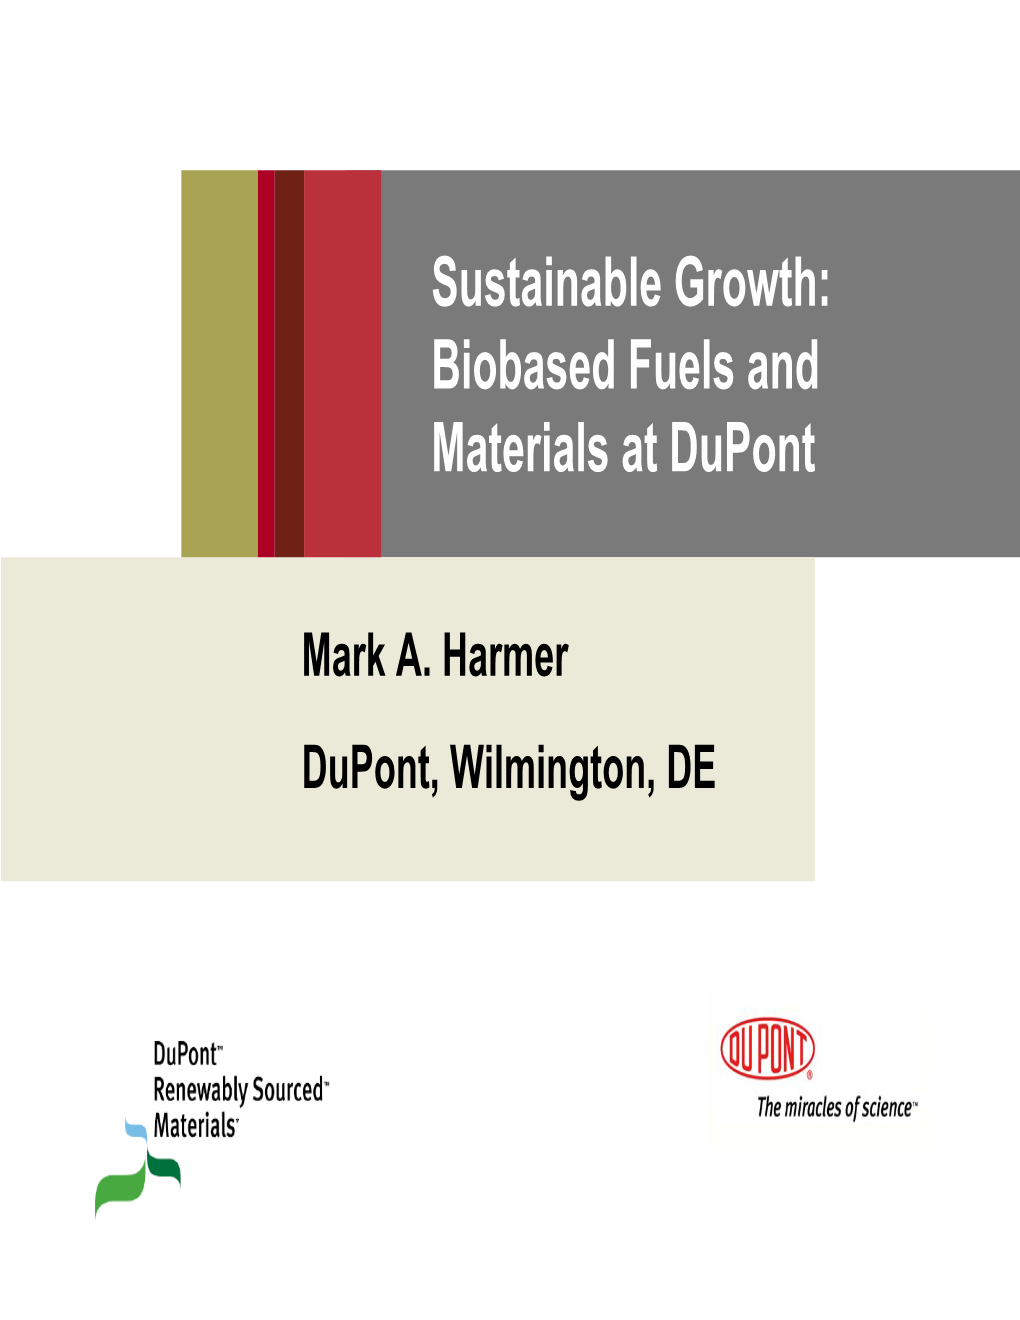 Sustainable Growth: Biobased Fuels and Materials at Dupont